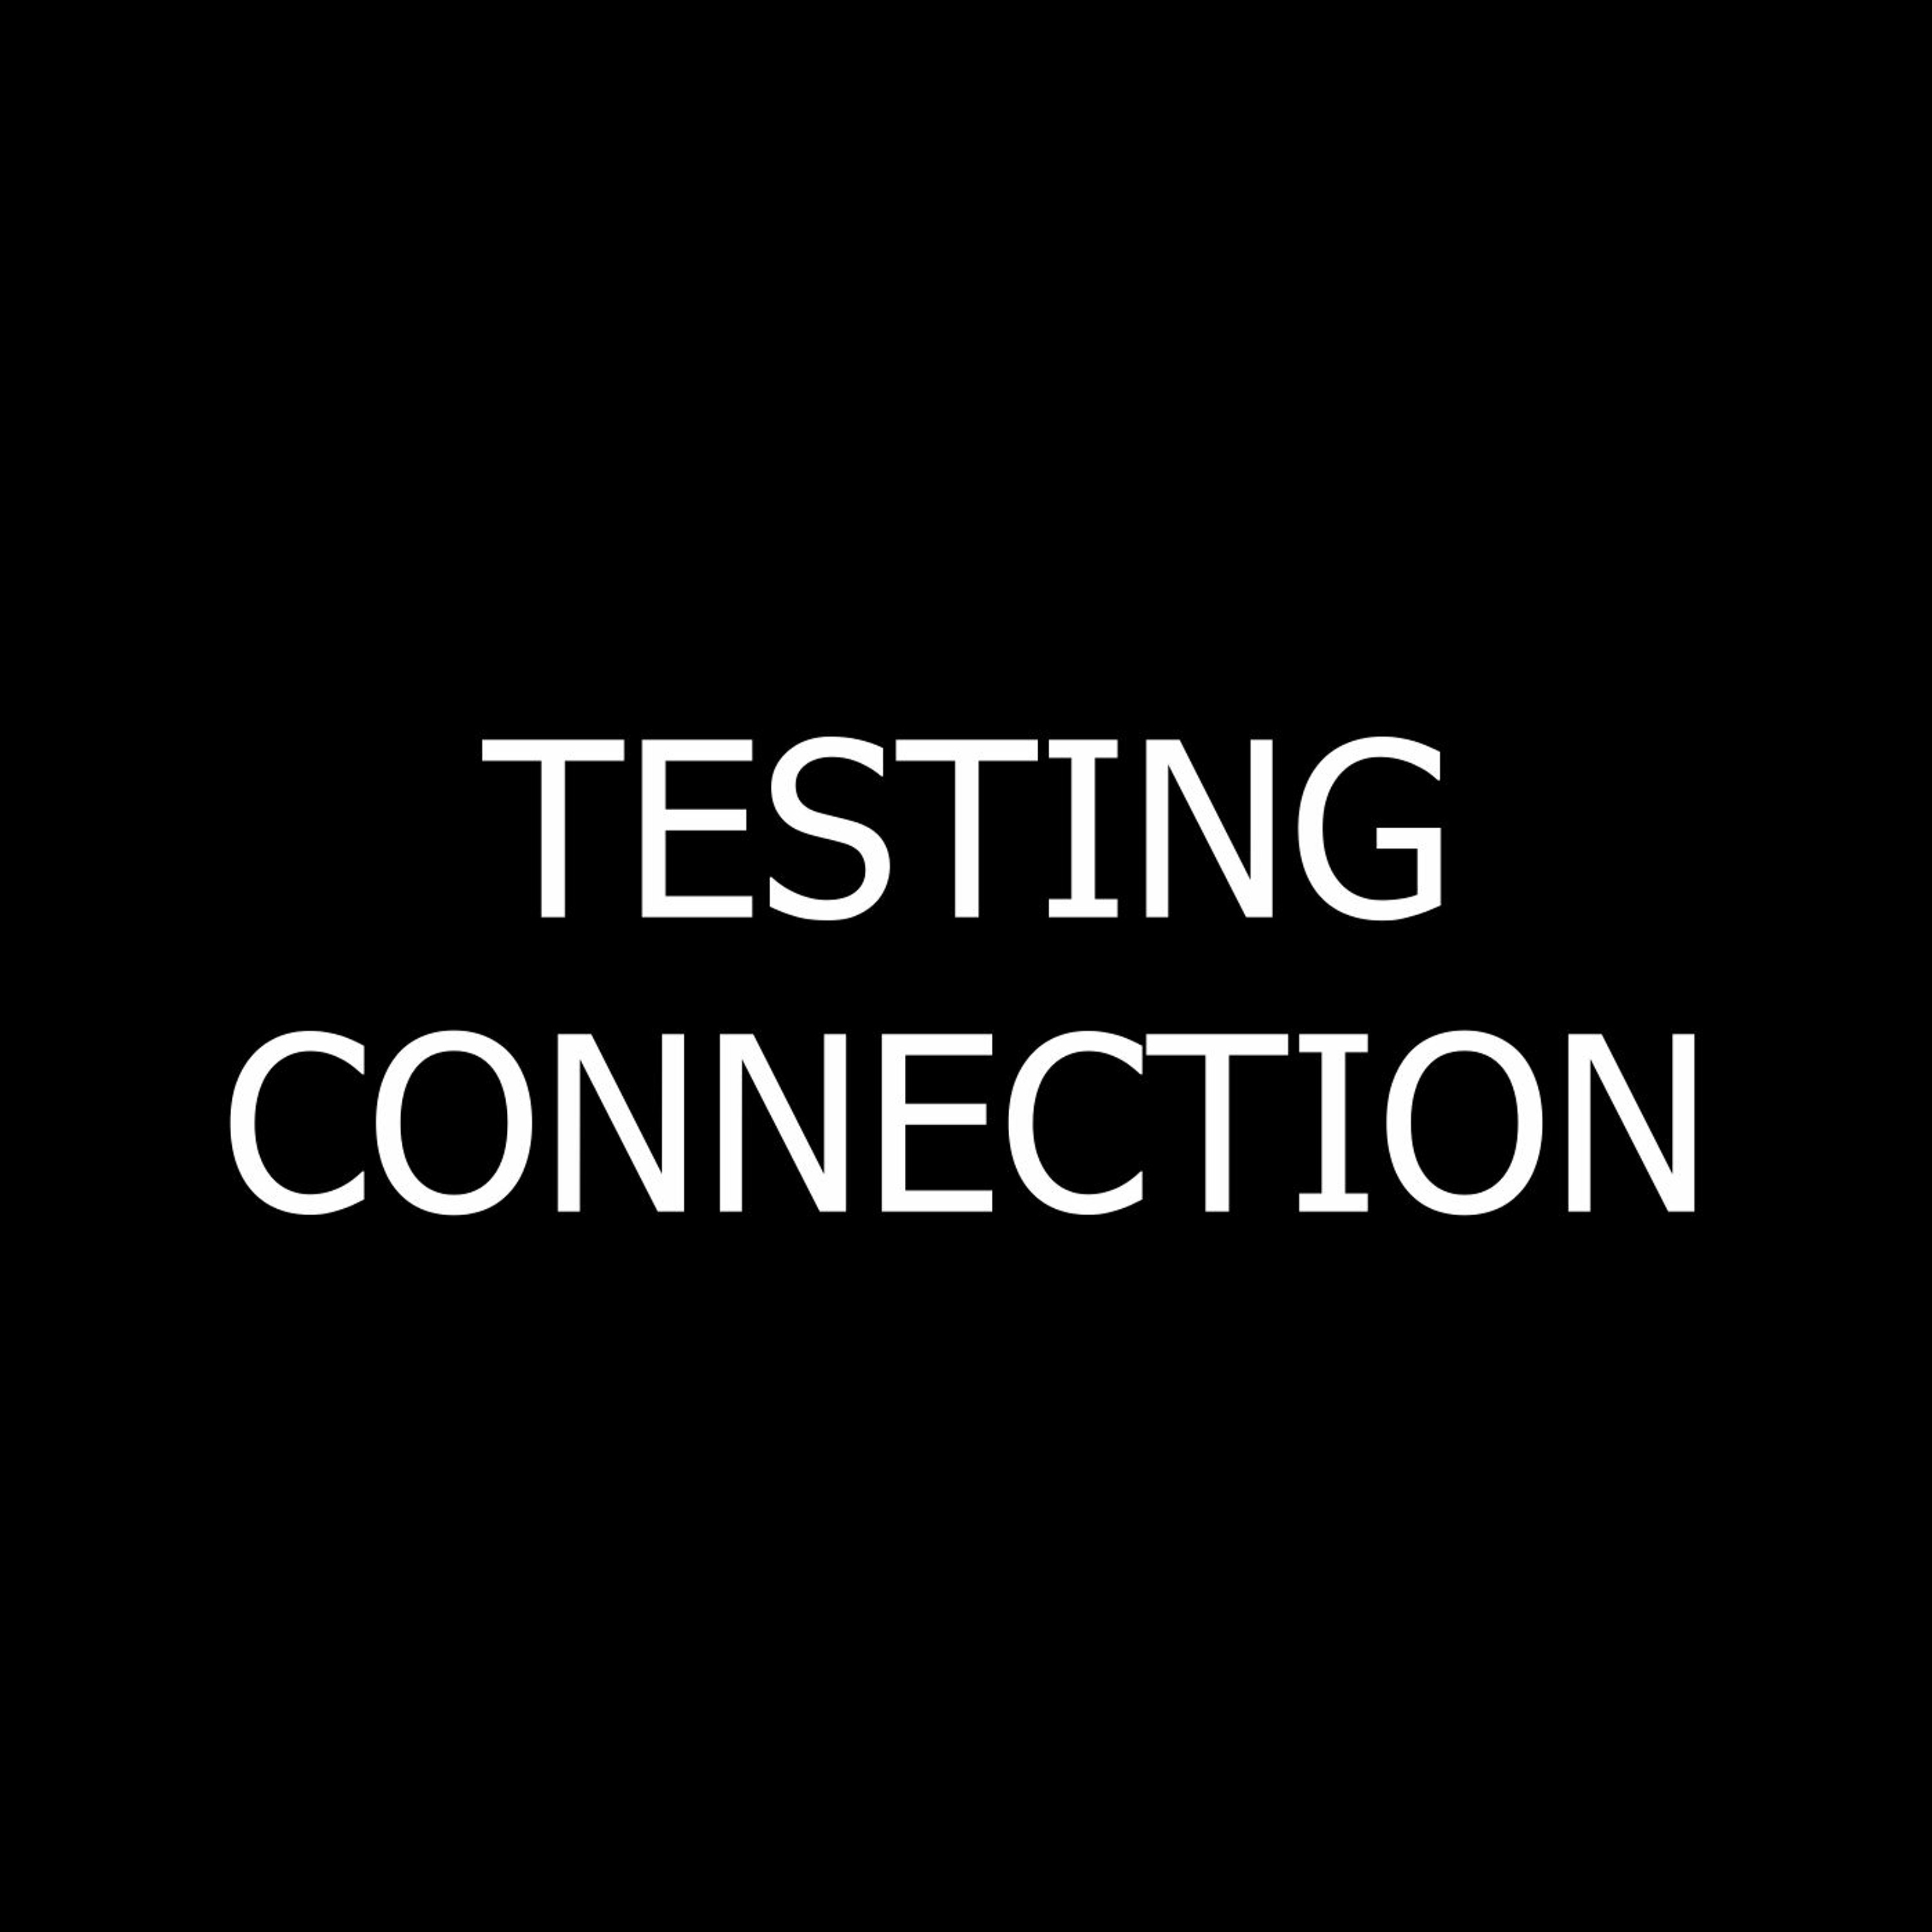 Testing Connection - 01